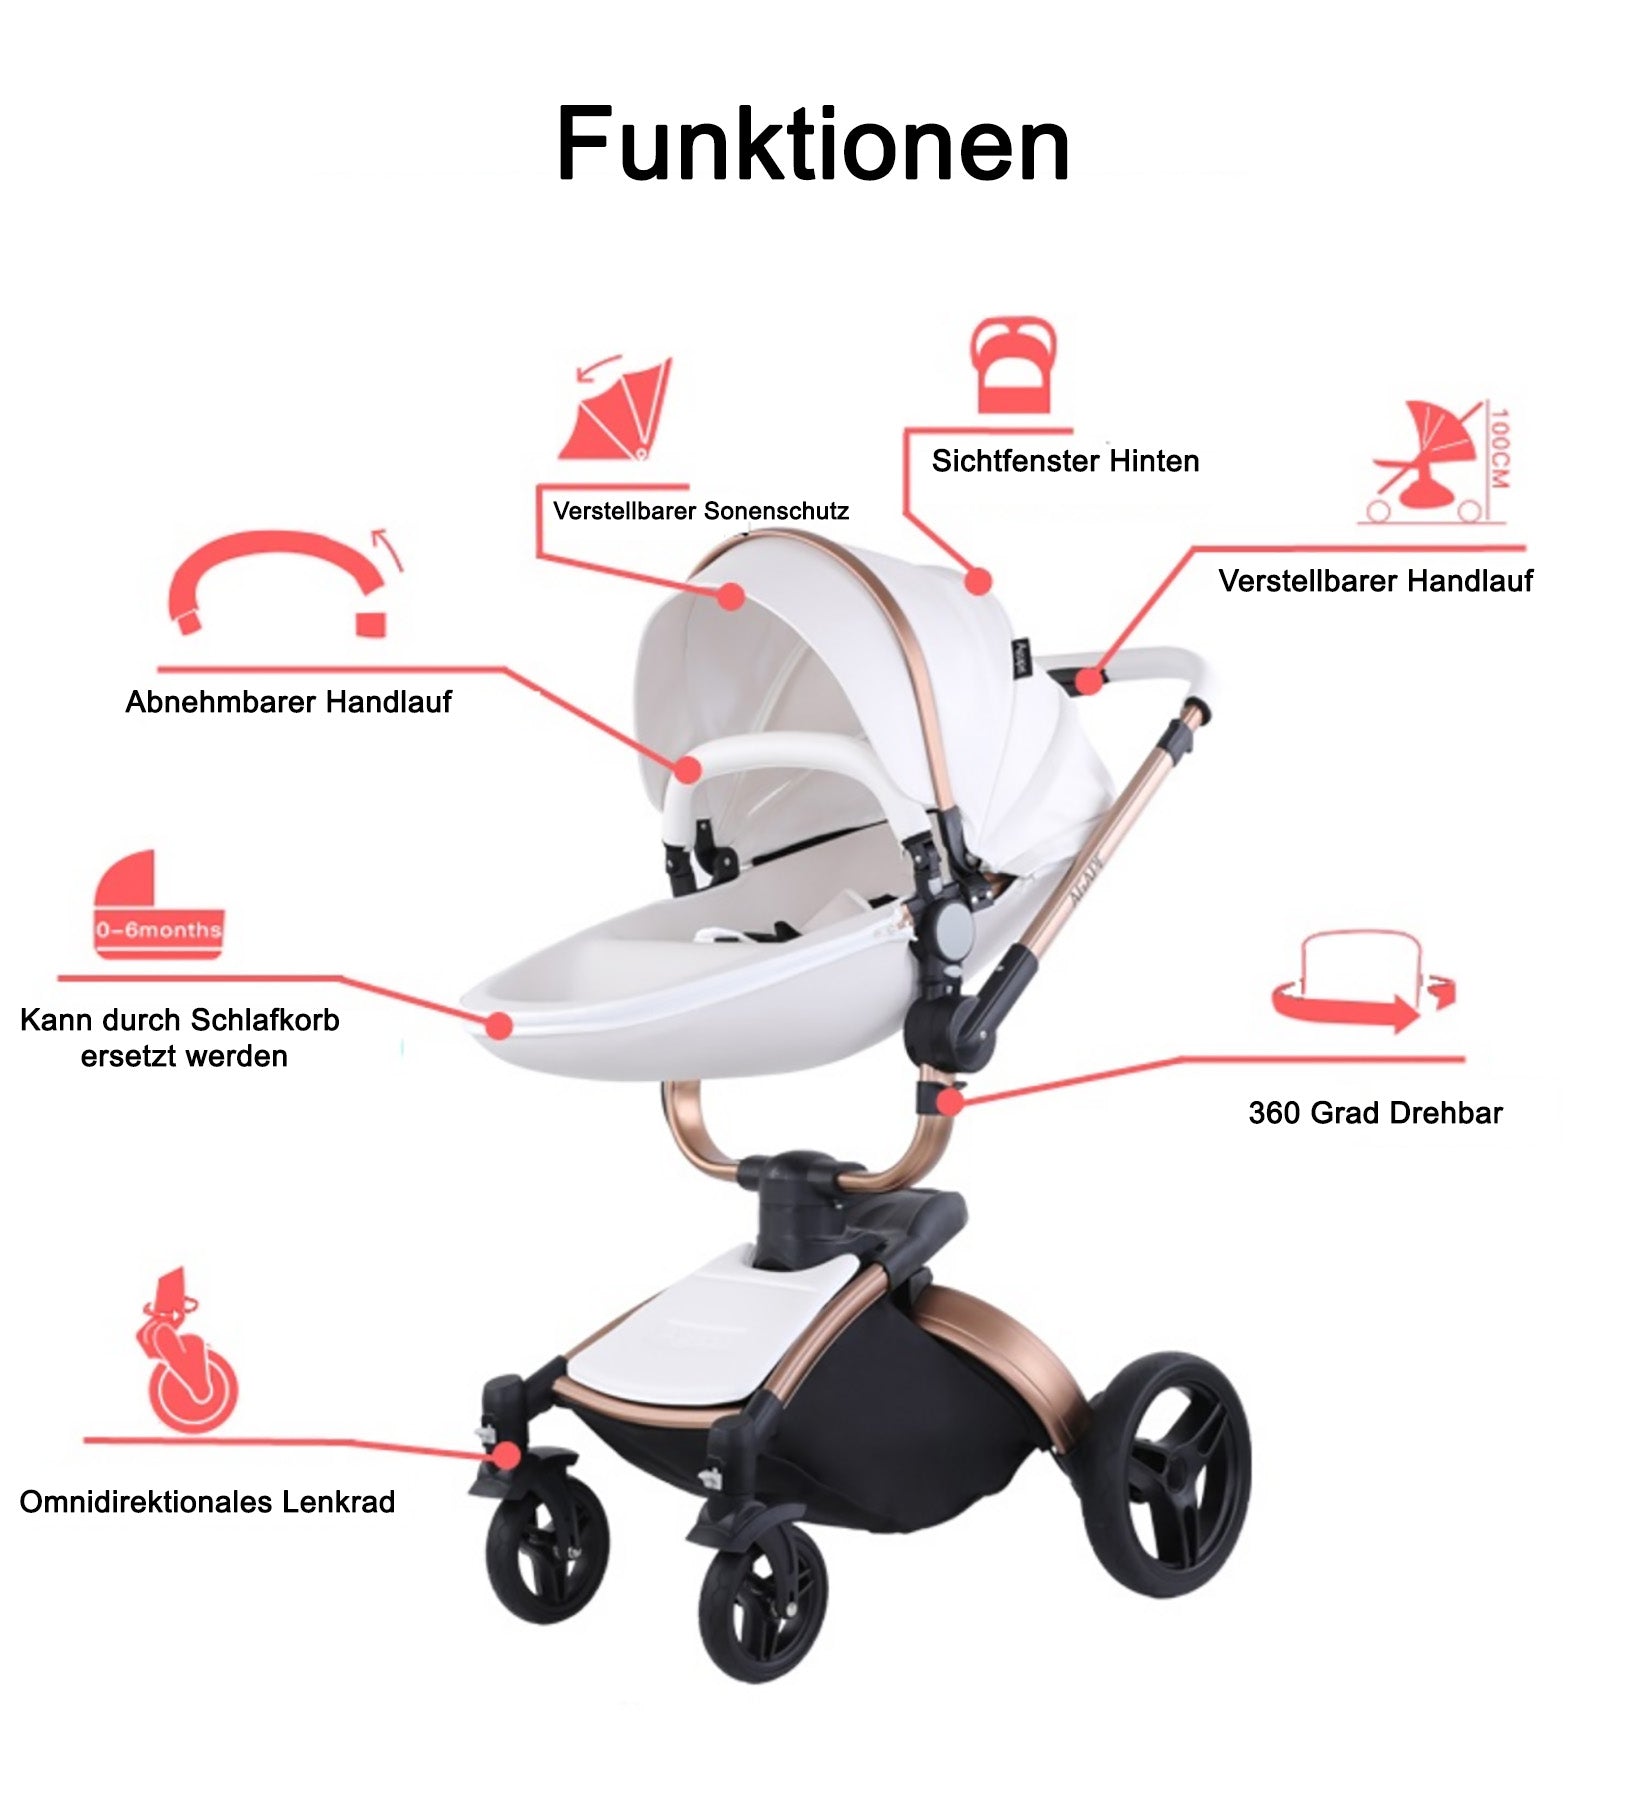 TPFLiving combination stroller 3in1 set - model 2 fabric